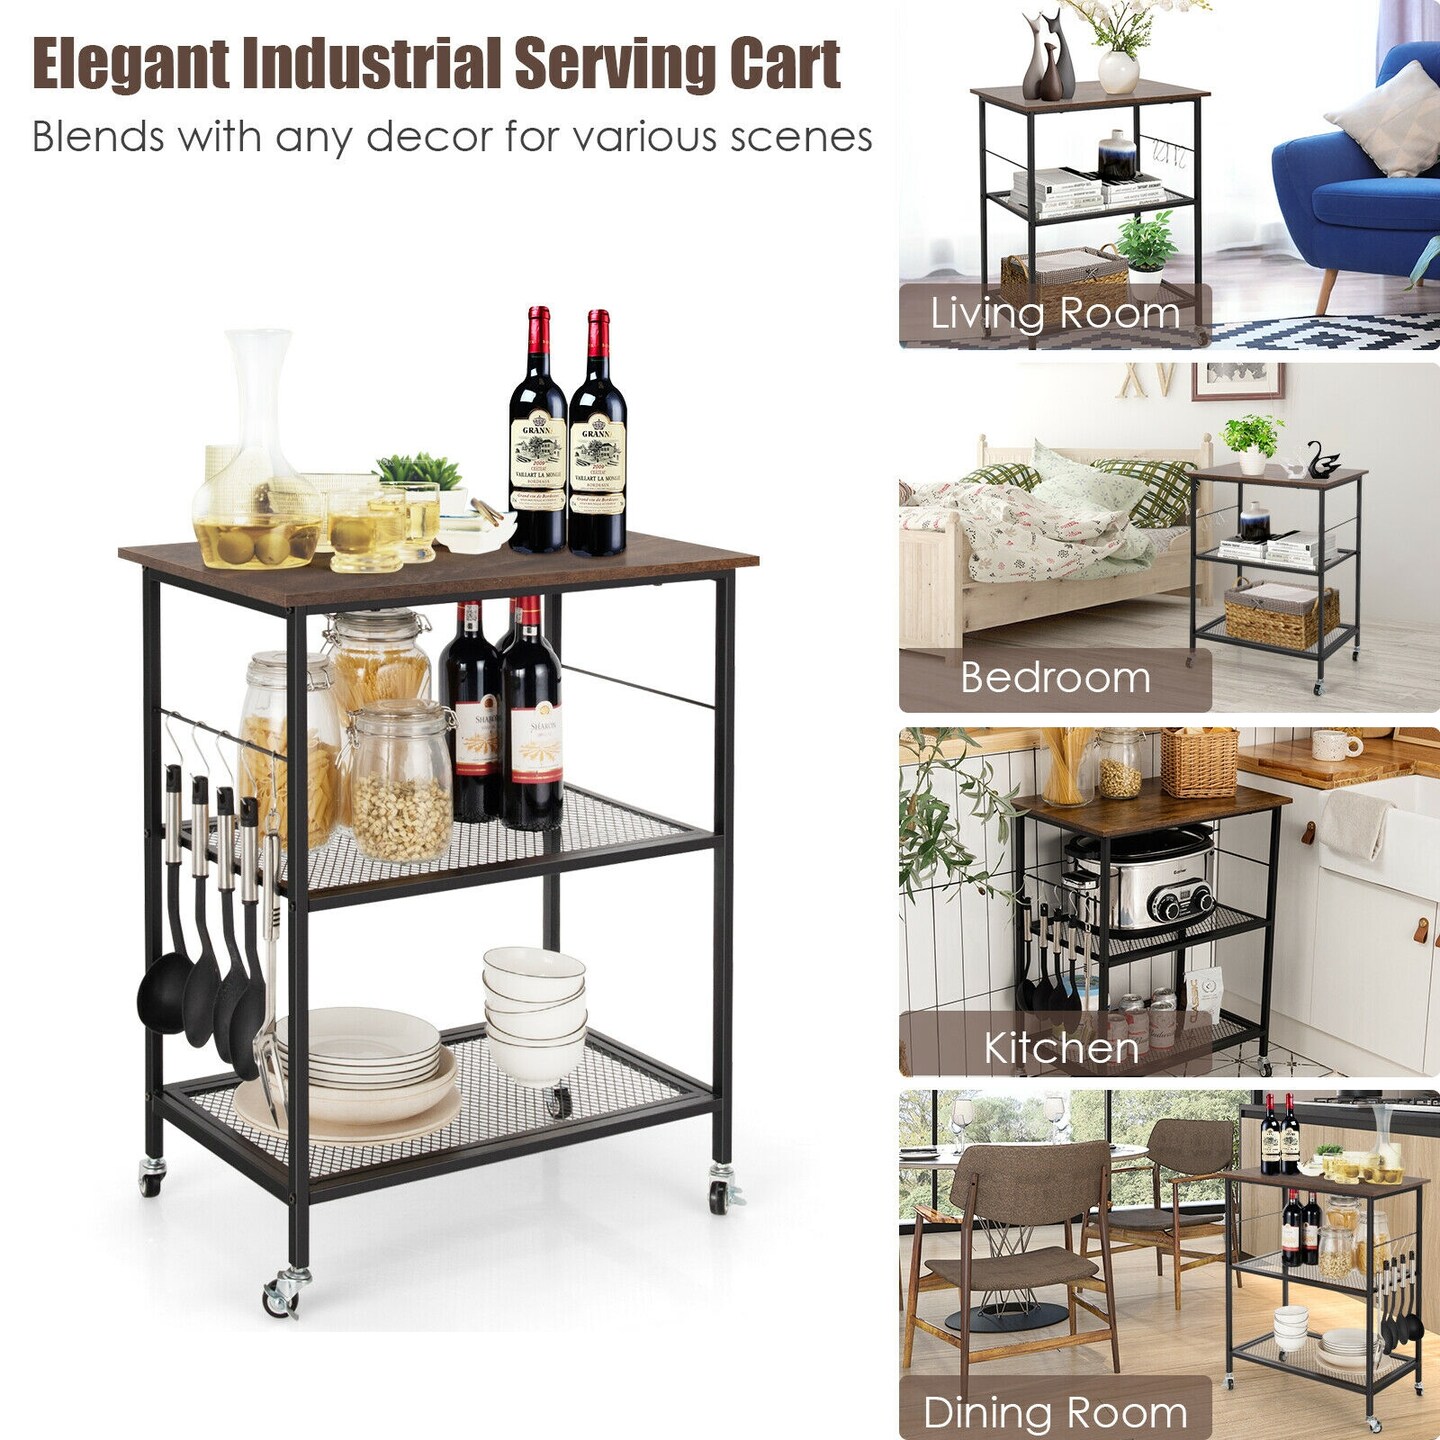 3-Tier Kitchen Serving Cart Utility Standing Microwave Rack with Hooks Brown